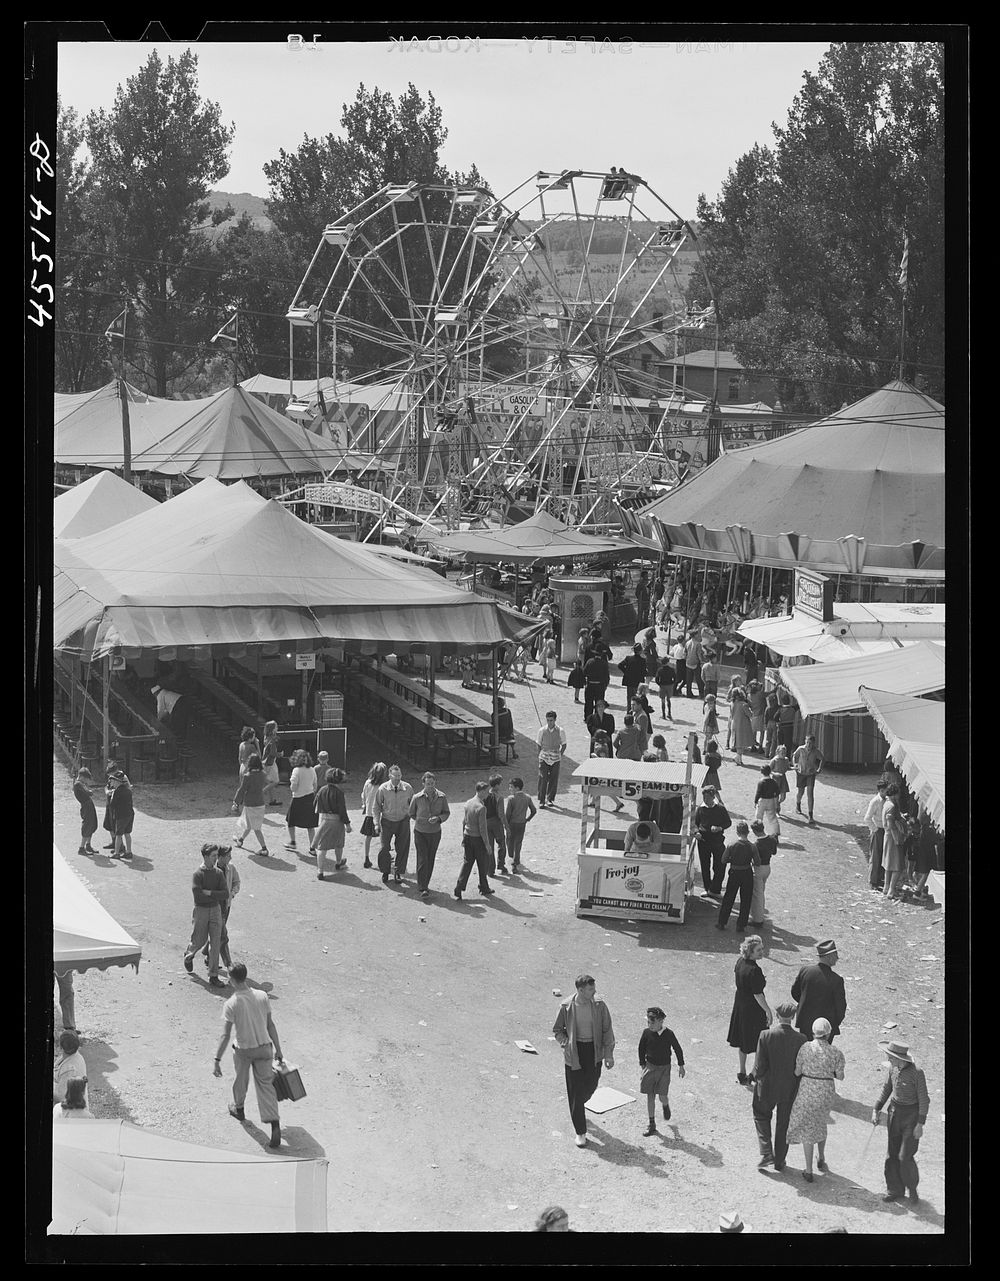 At the Rutland Fair, Vermont. Sourced from the Library of Congress.